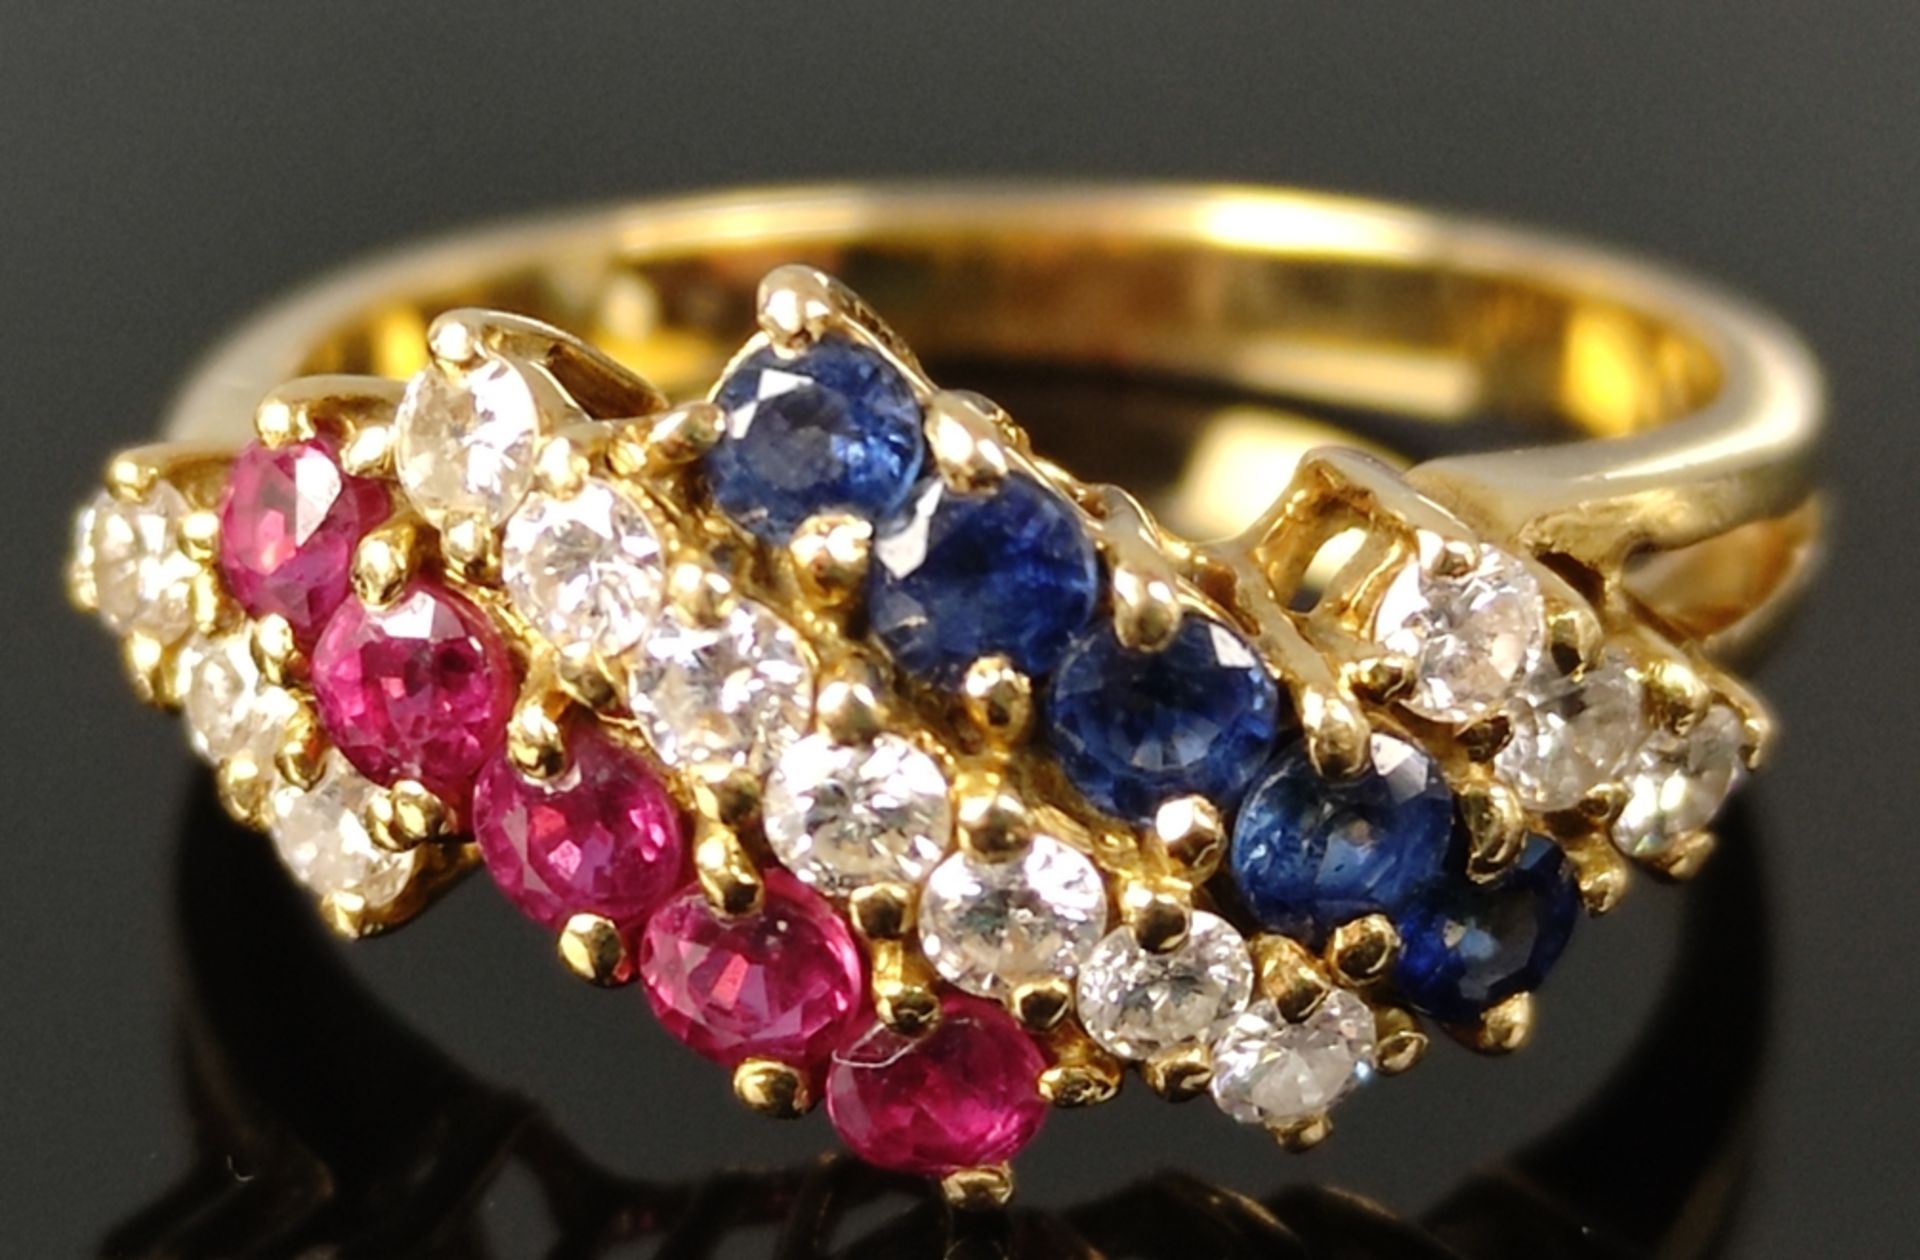 Ring set with 13 diamonds, 5 sapphires and 5 rubies, 750/18K yellow gold, 3.9g, ring size 55 - Image 2 of 4